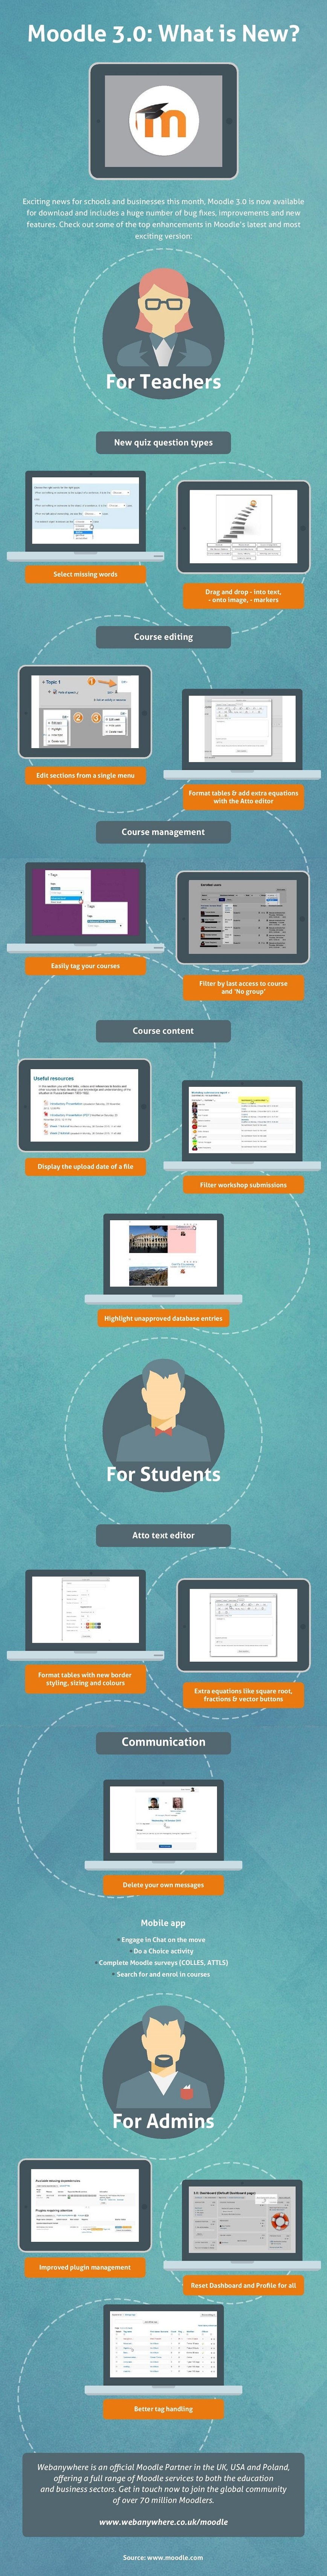 What’s New in Moodle 3.0 Infographic